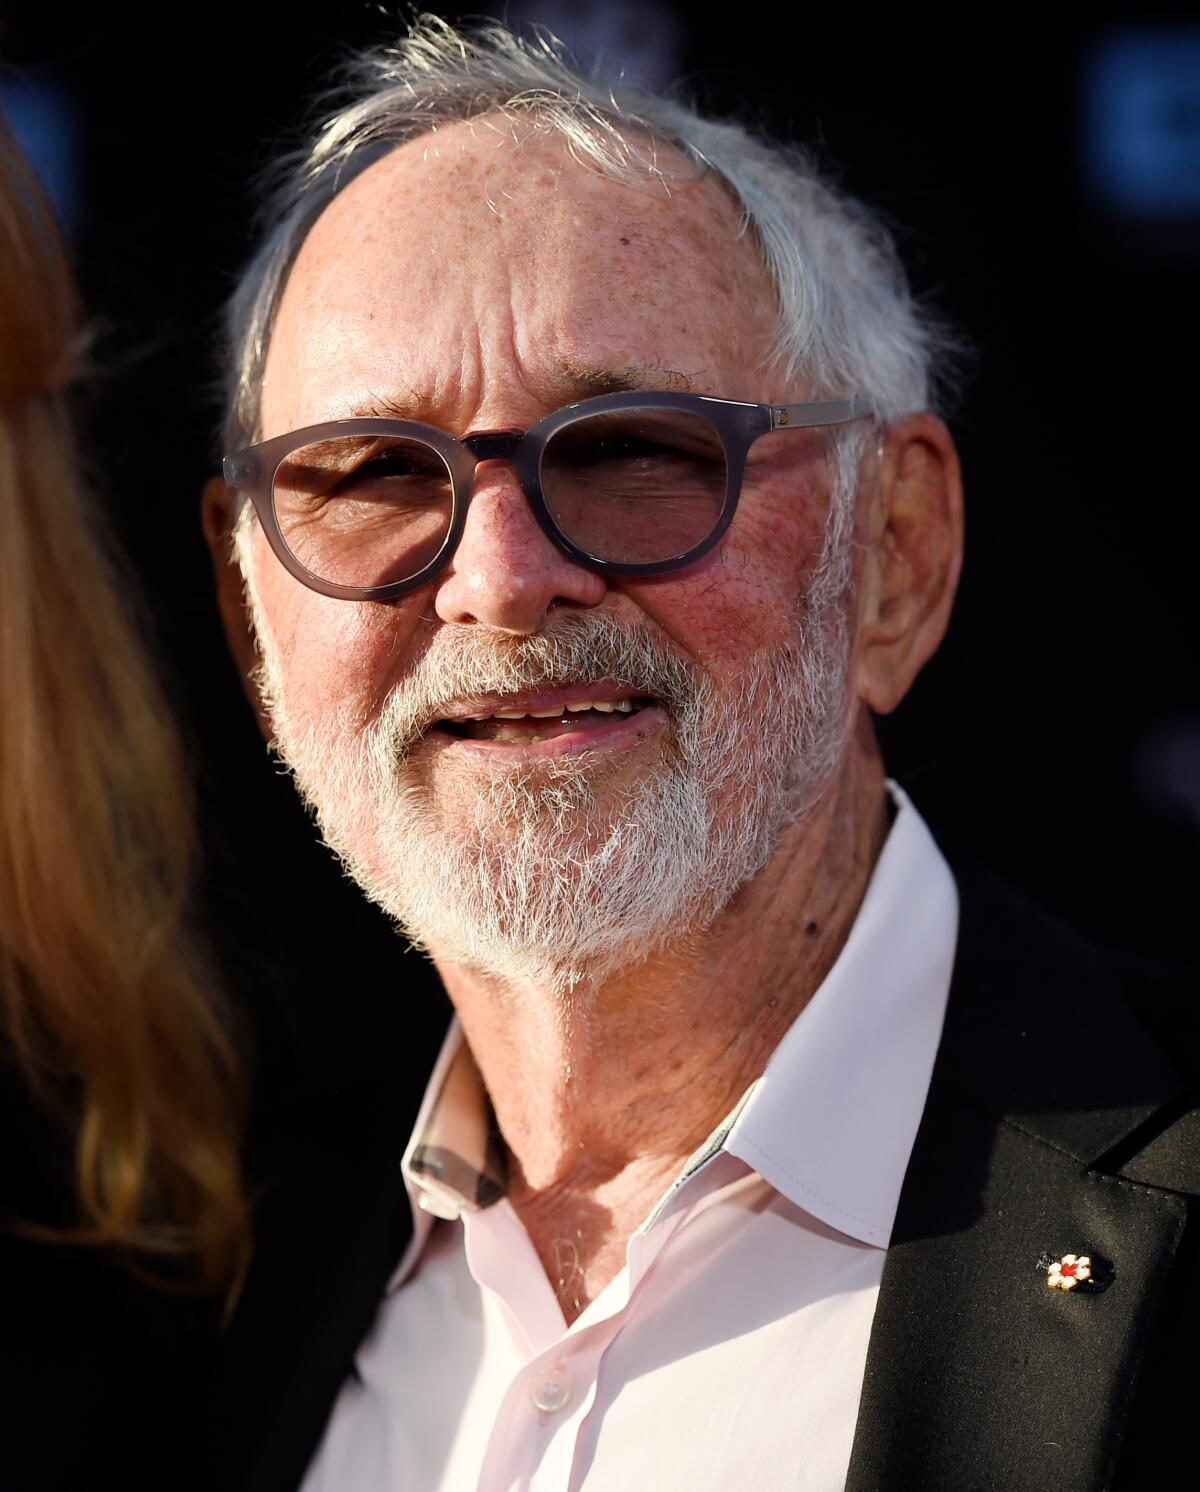 Norman Jewison in sunglasses and a suit without a tie